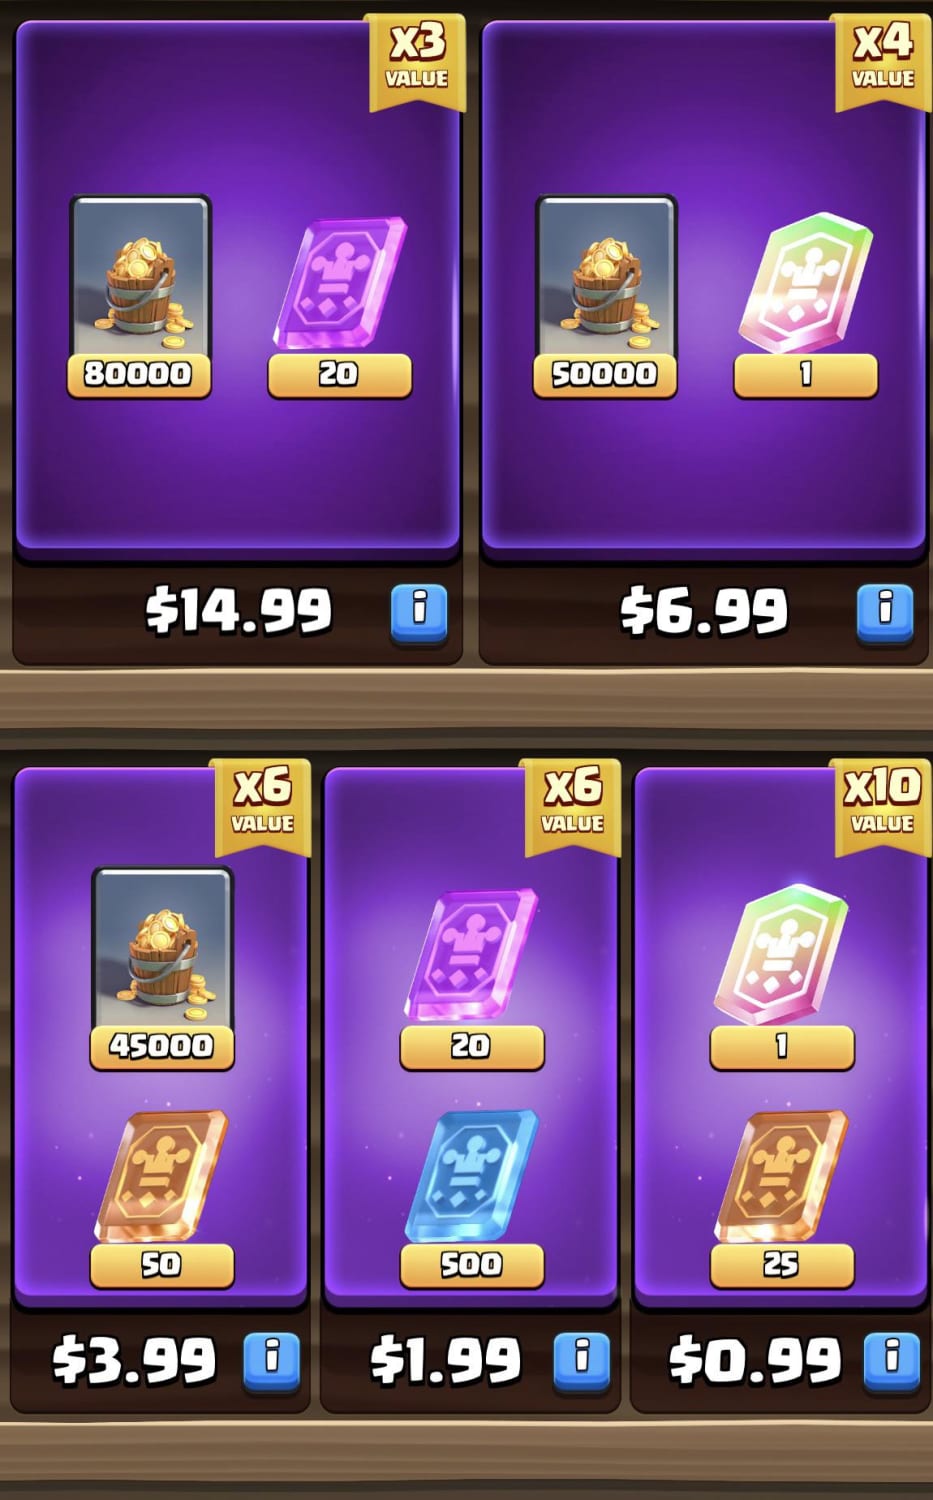 Supercell trying to swindle all of us 1 pack for $15 or 4 packs for $14